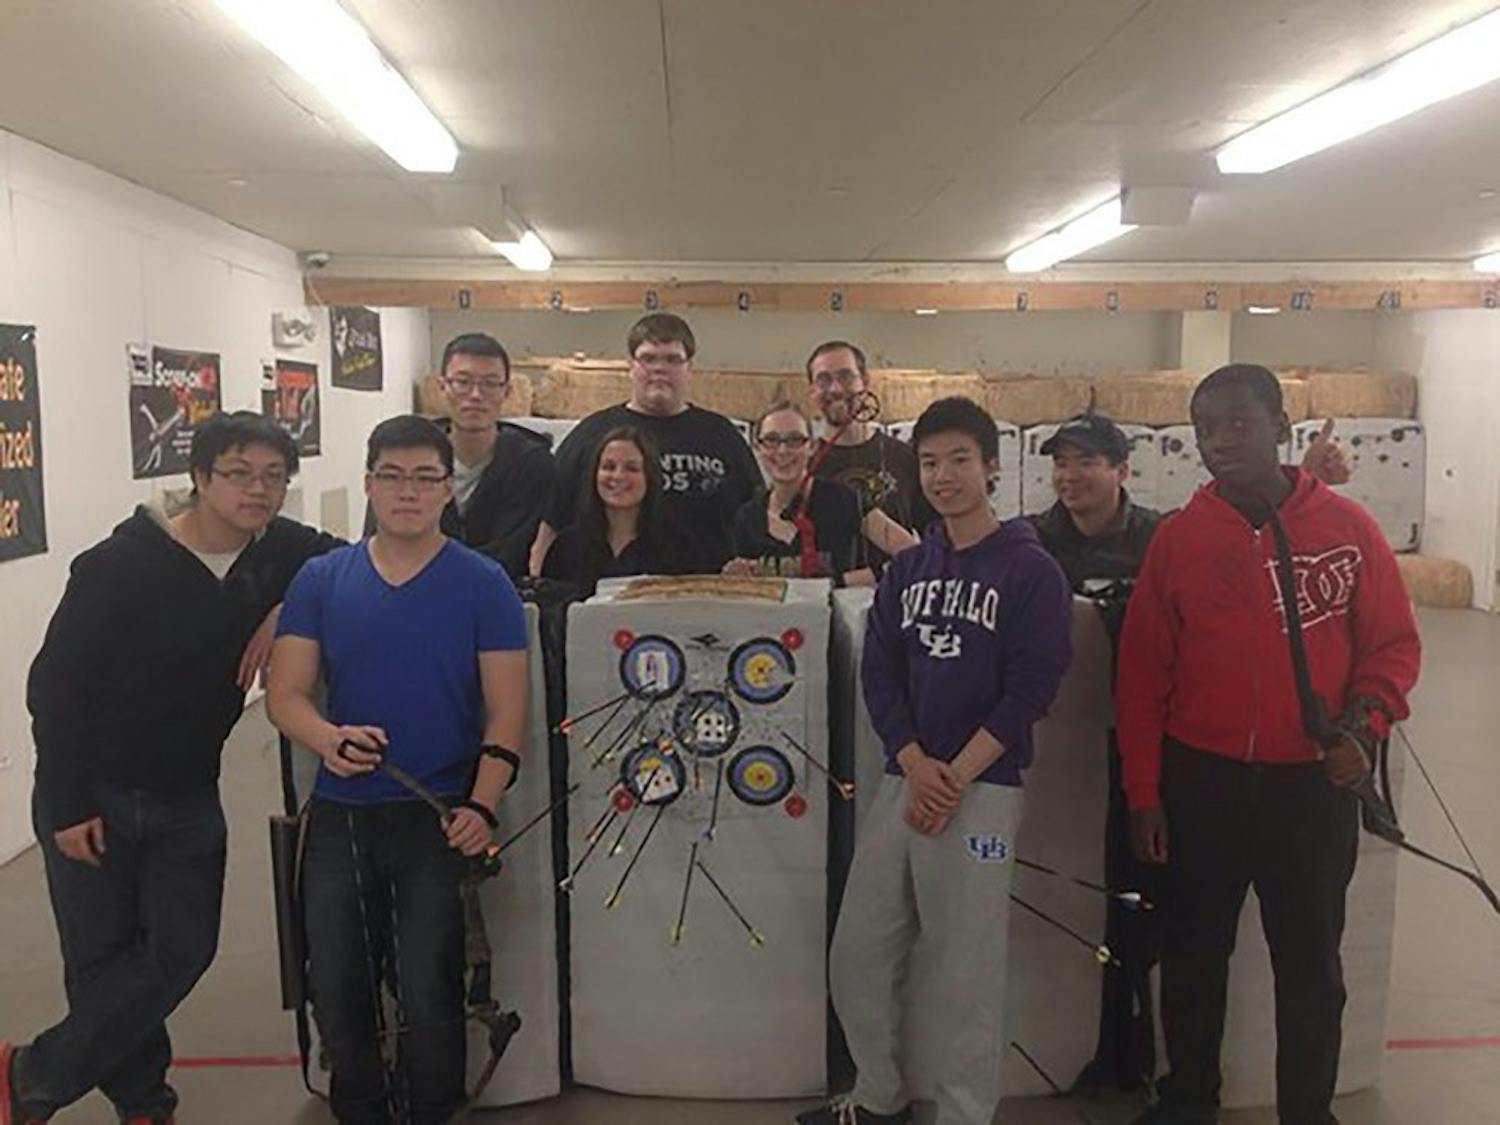 The Archery club is one of the temporary Student Association clubs. Members are currently completing the requirements to become a permanent club, but have encountered many problems along the way.